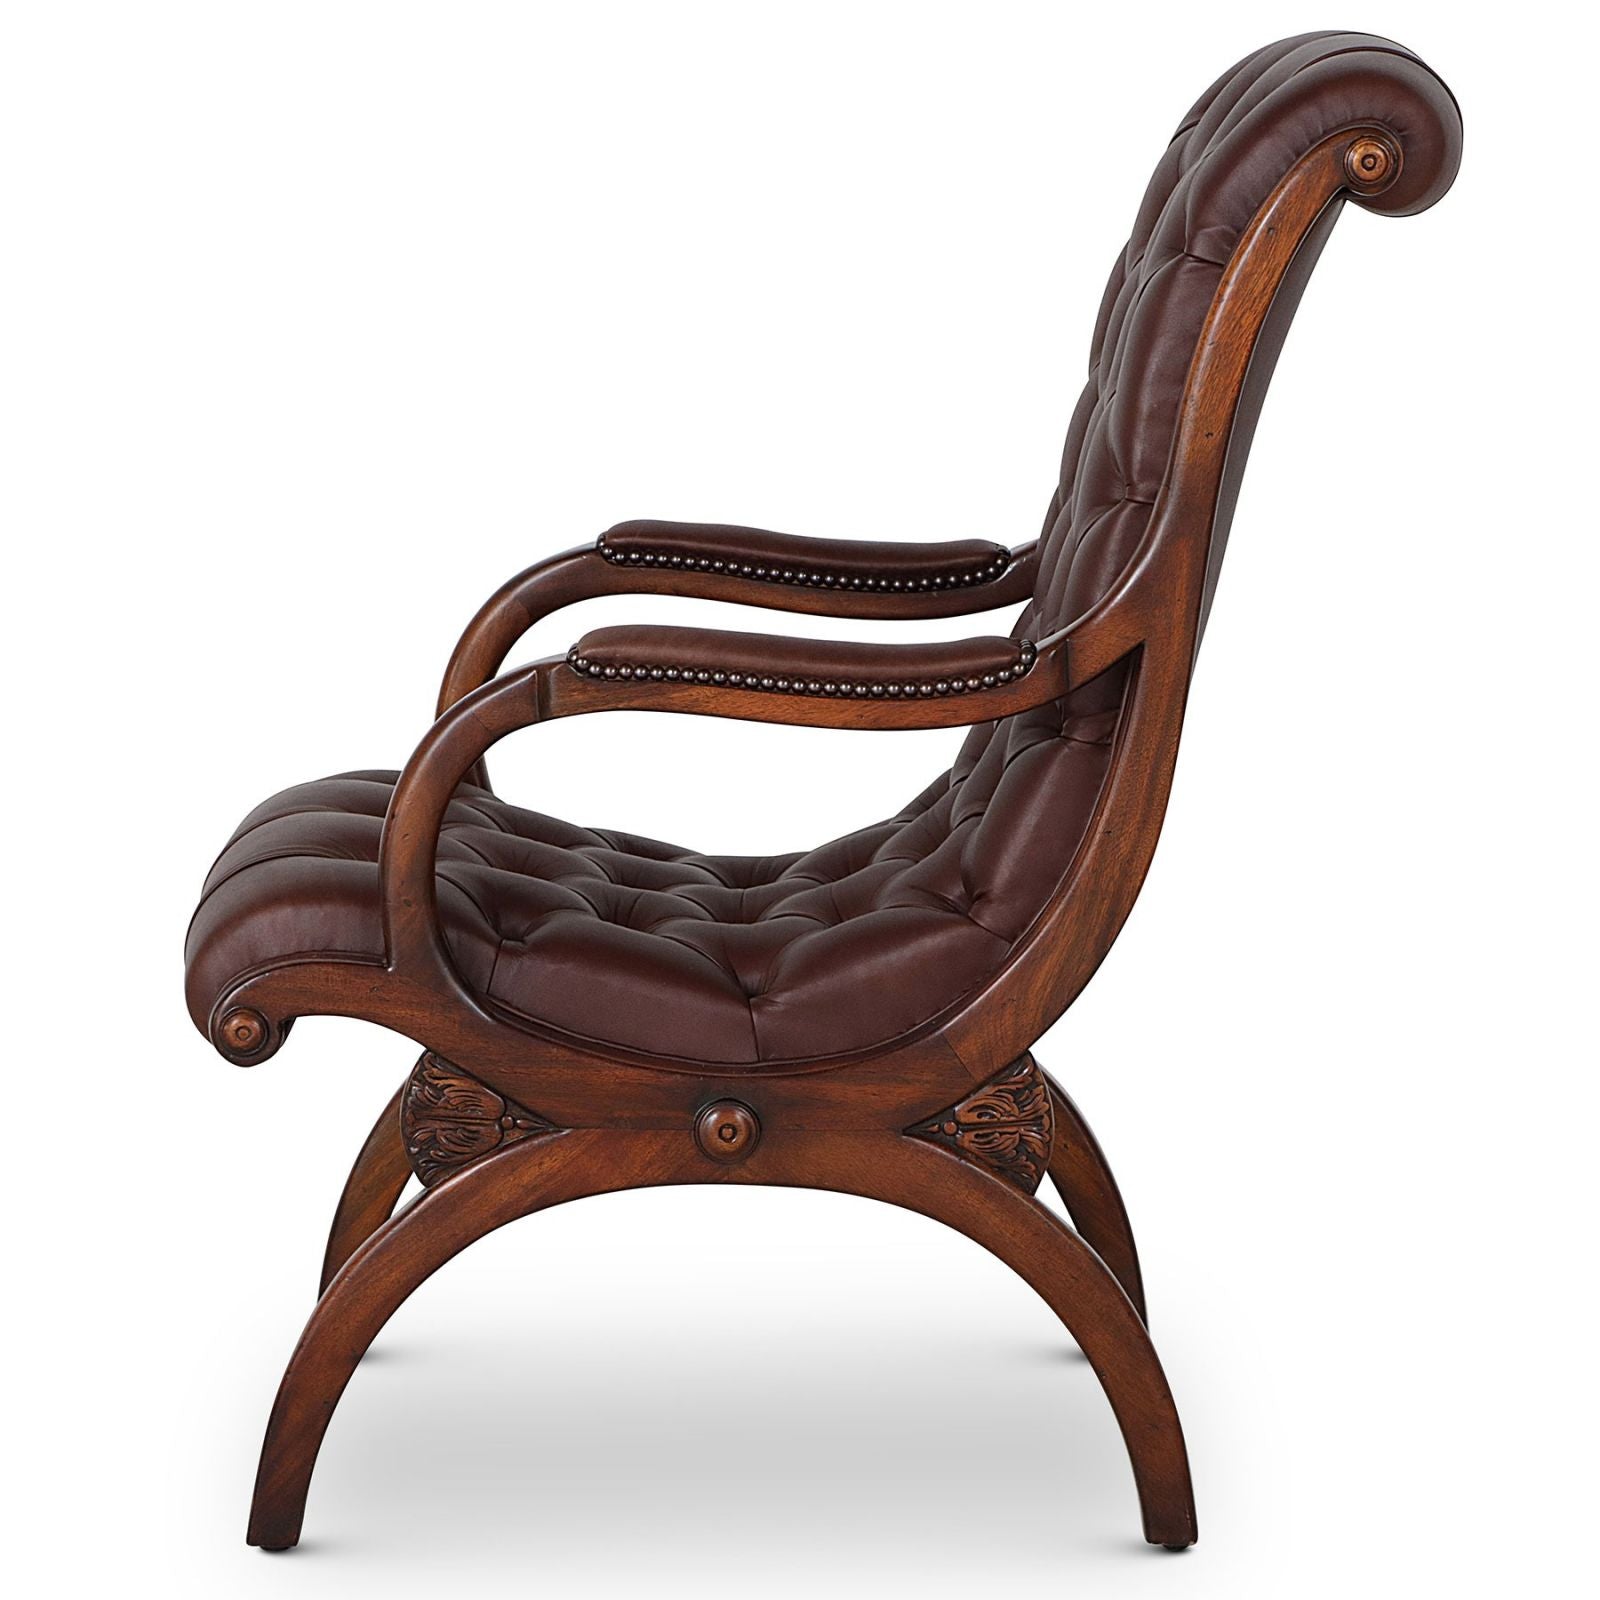 Classic slipper arm chair in chocolate brown leather